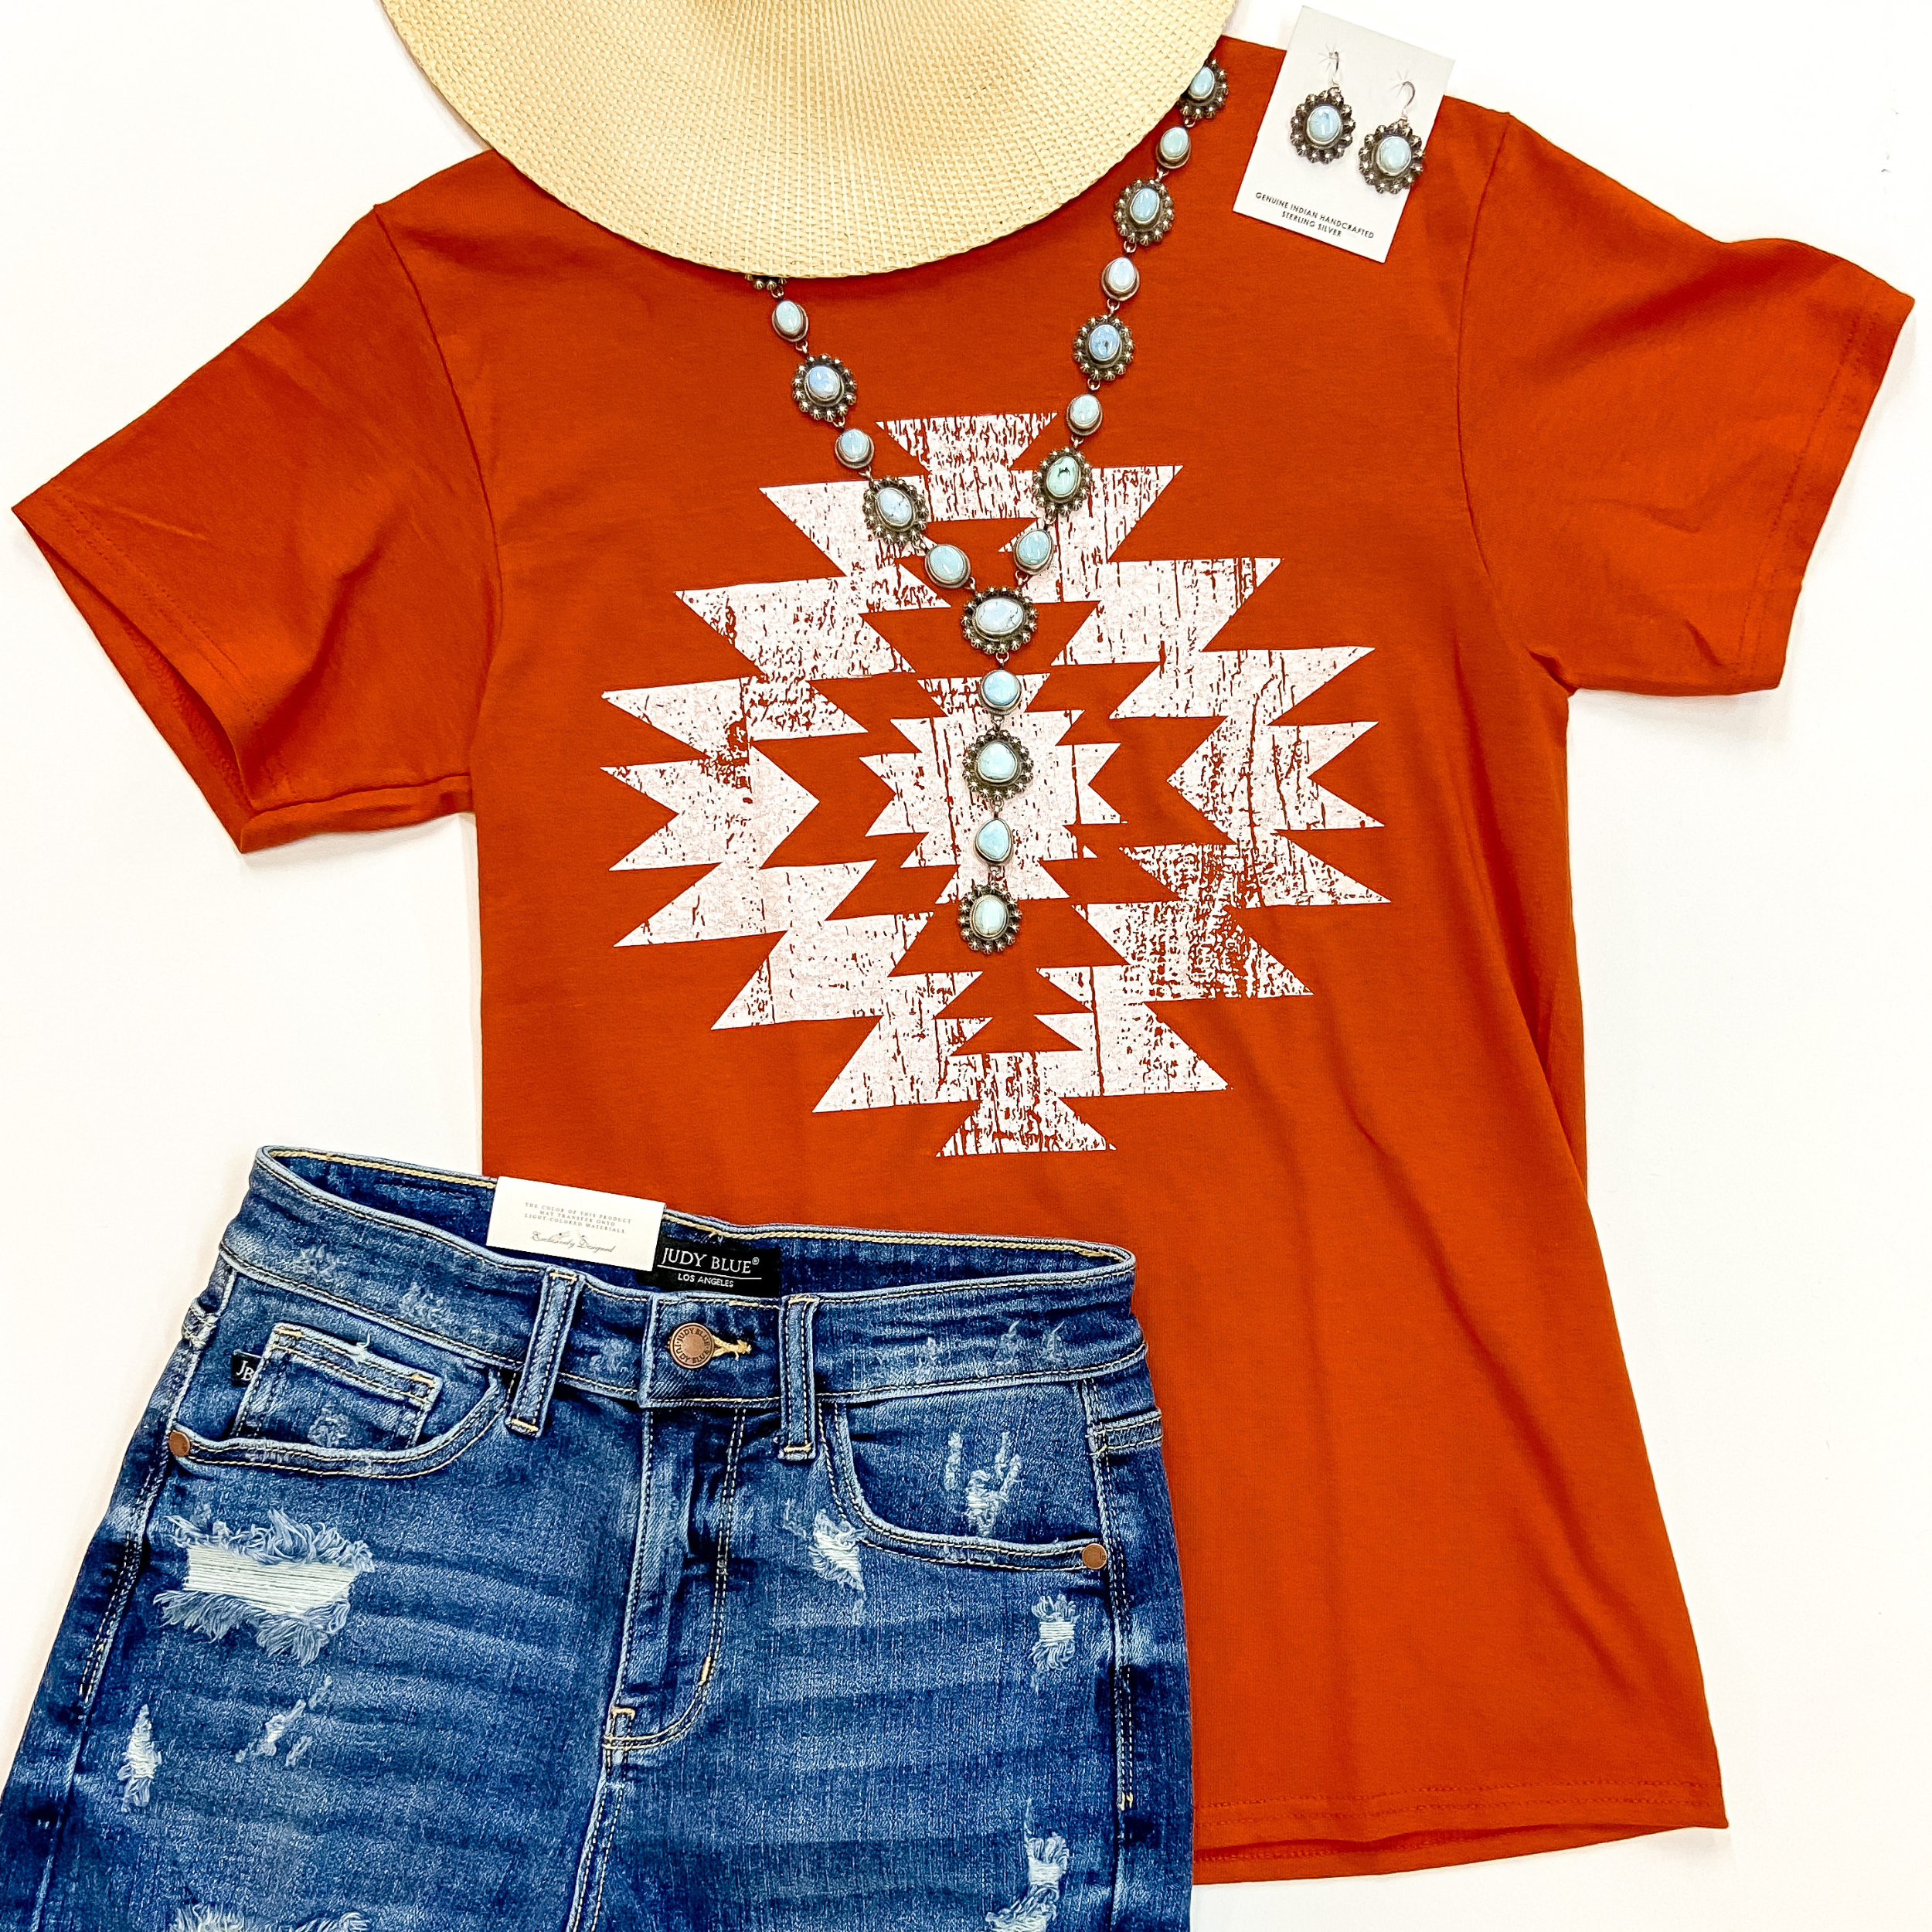 A burnt orange short sleeve tee shirt with a crew neckline and a graphic of a tribal symbol. This tee shirt is pictured on a white background with denim shorts, genuine sterling silver and turquoise jewelry, and a straw hat.